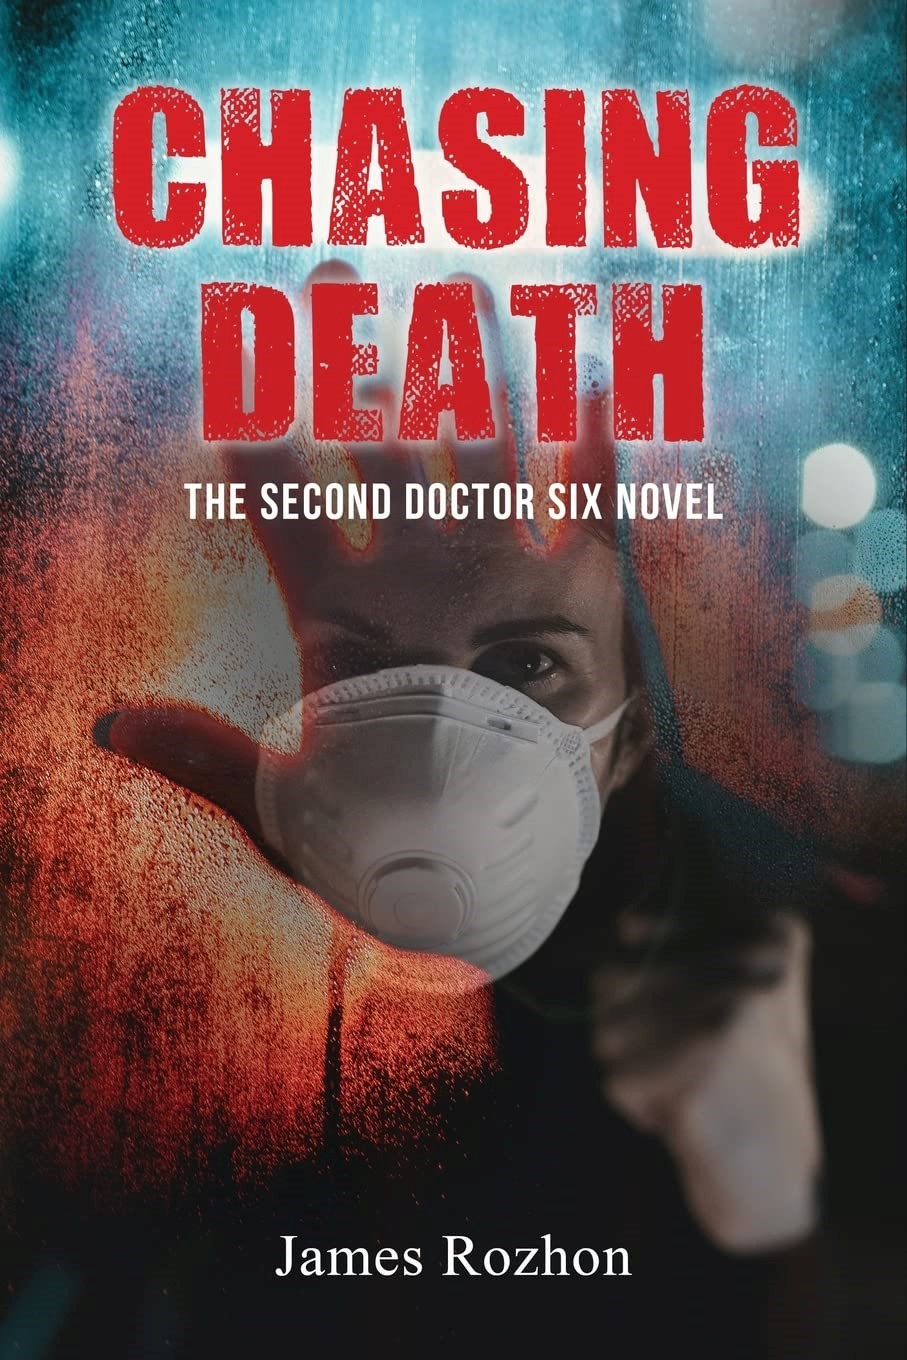 "Chasing Death" - The Latest Doctor Six Novel Takes Readers on a Gripping Medical Mystery Adventure